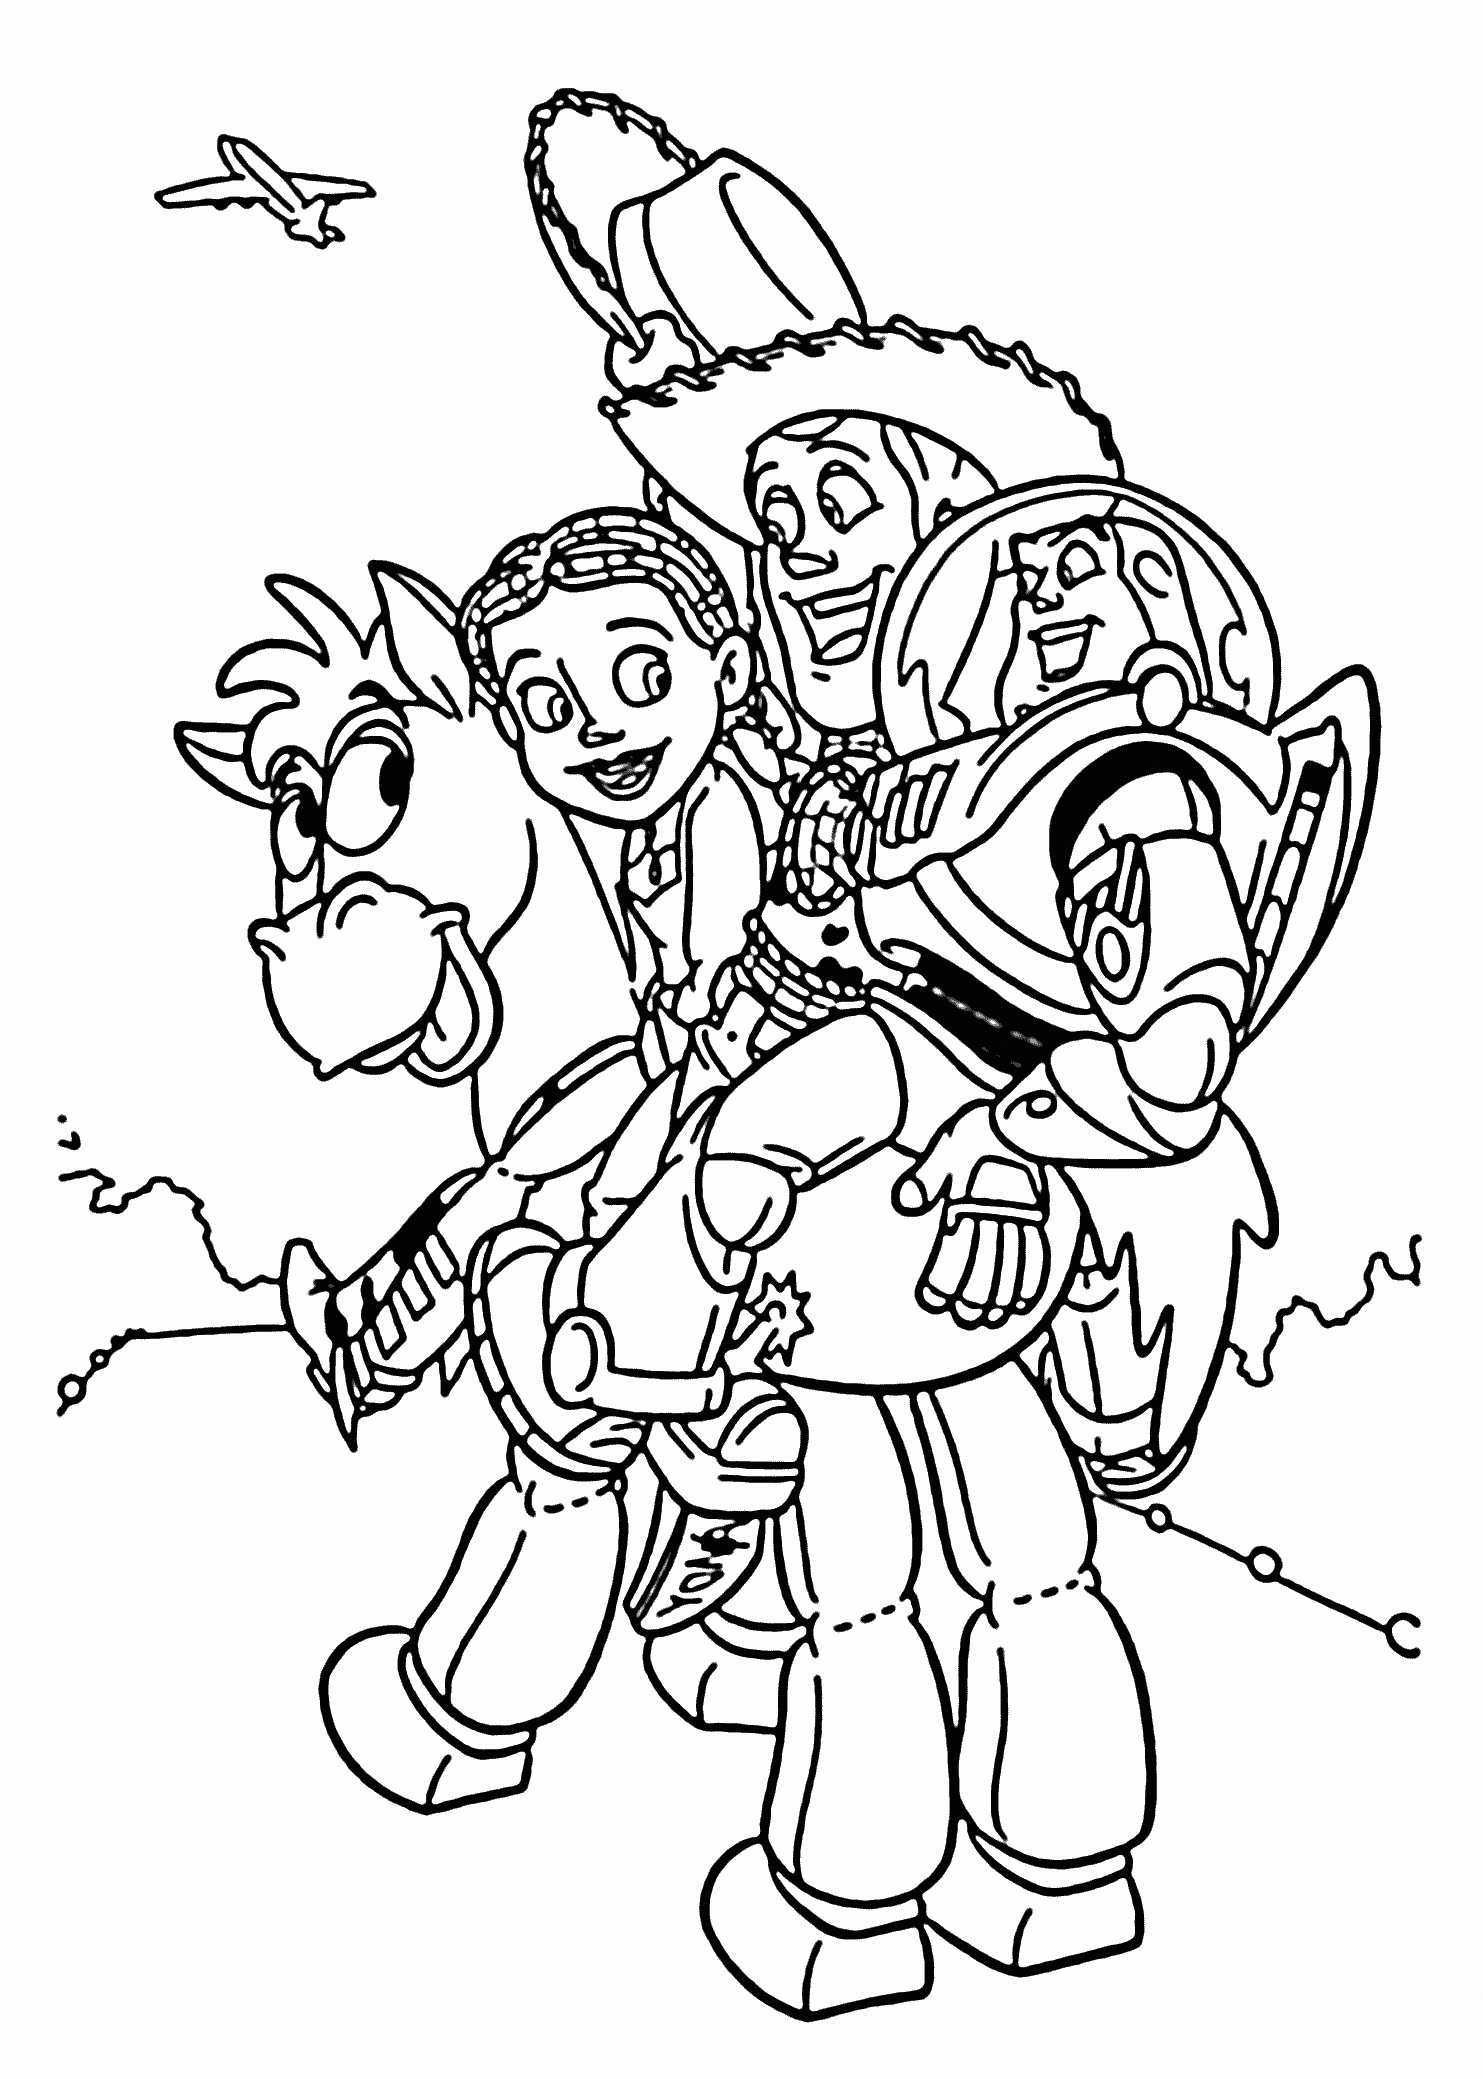 Jessie Toy Story 2 Printable Coloring Page